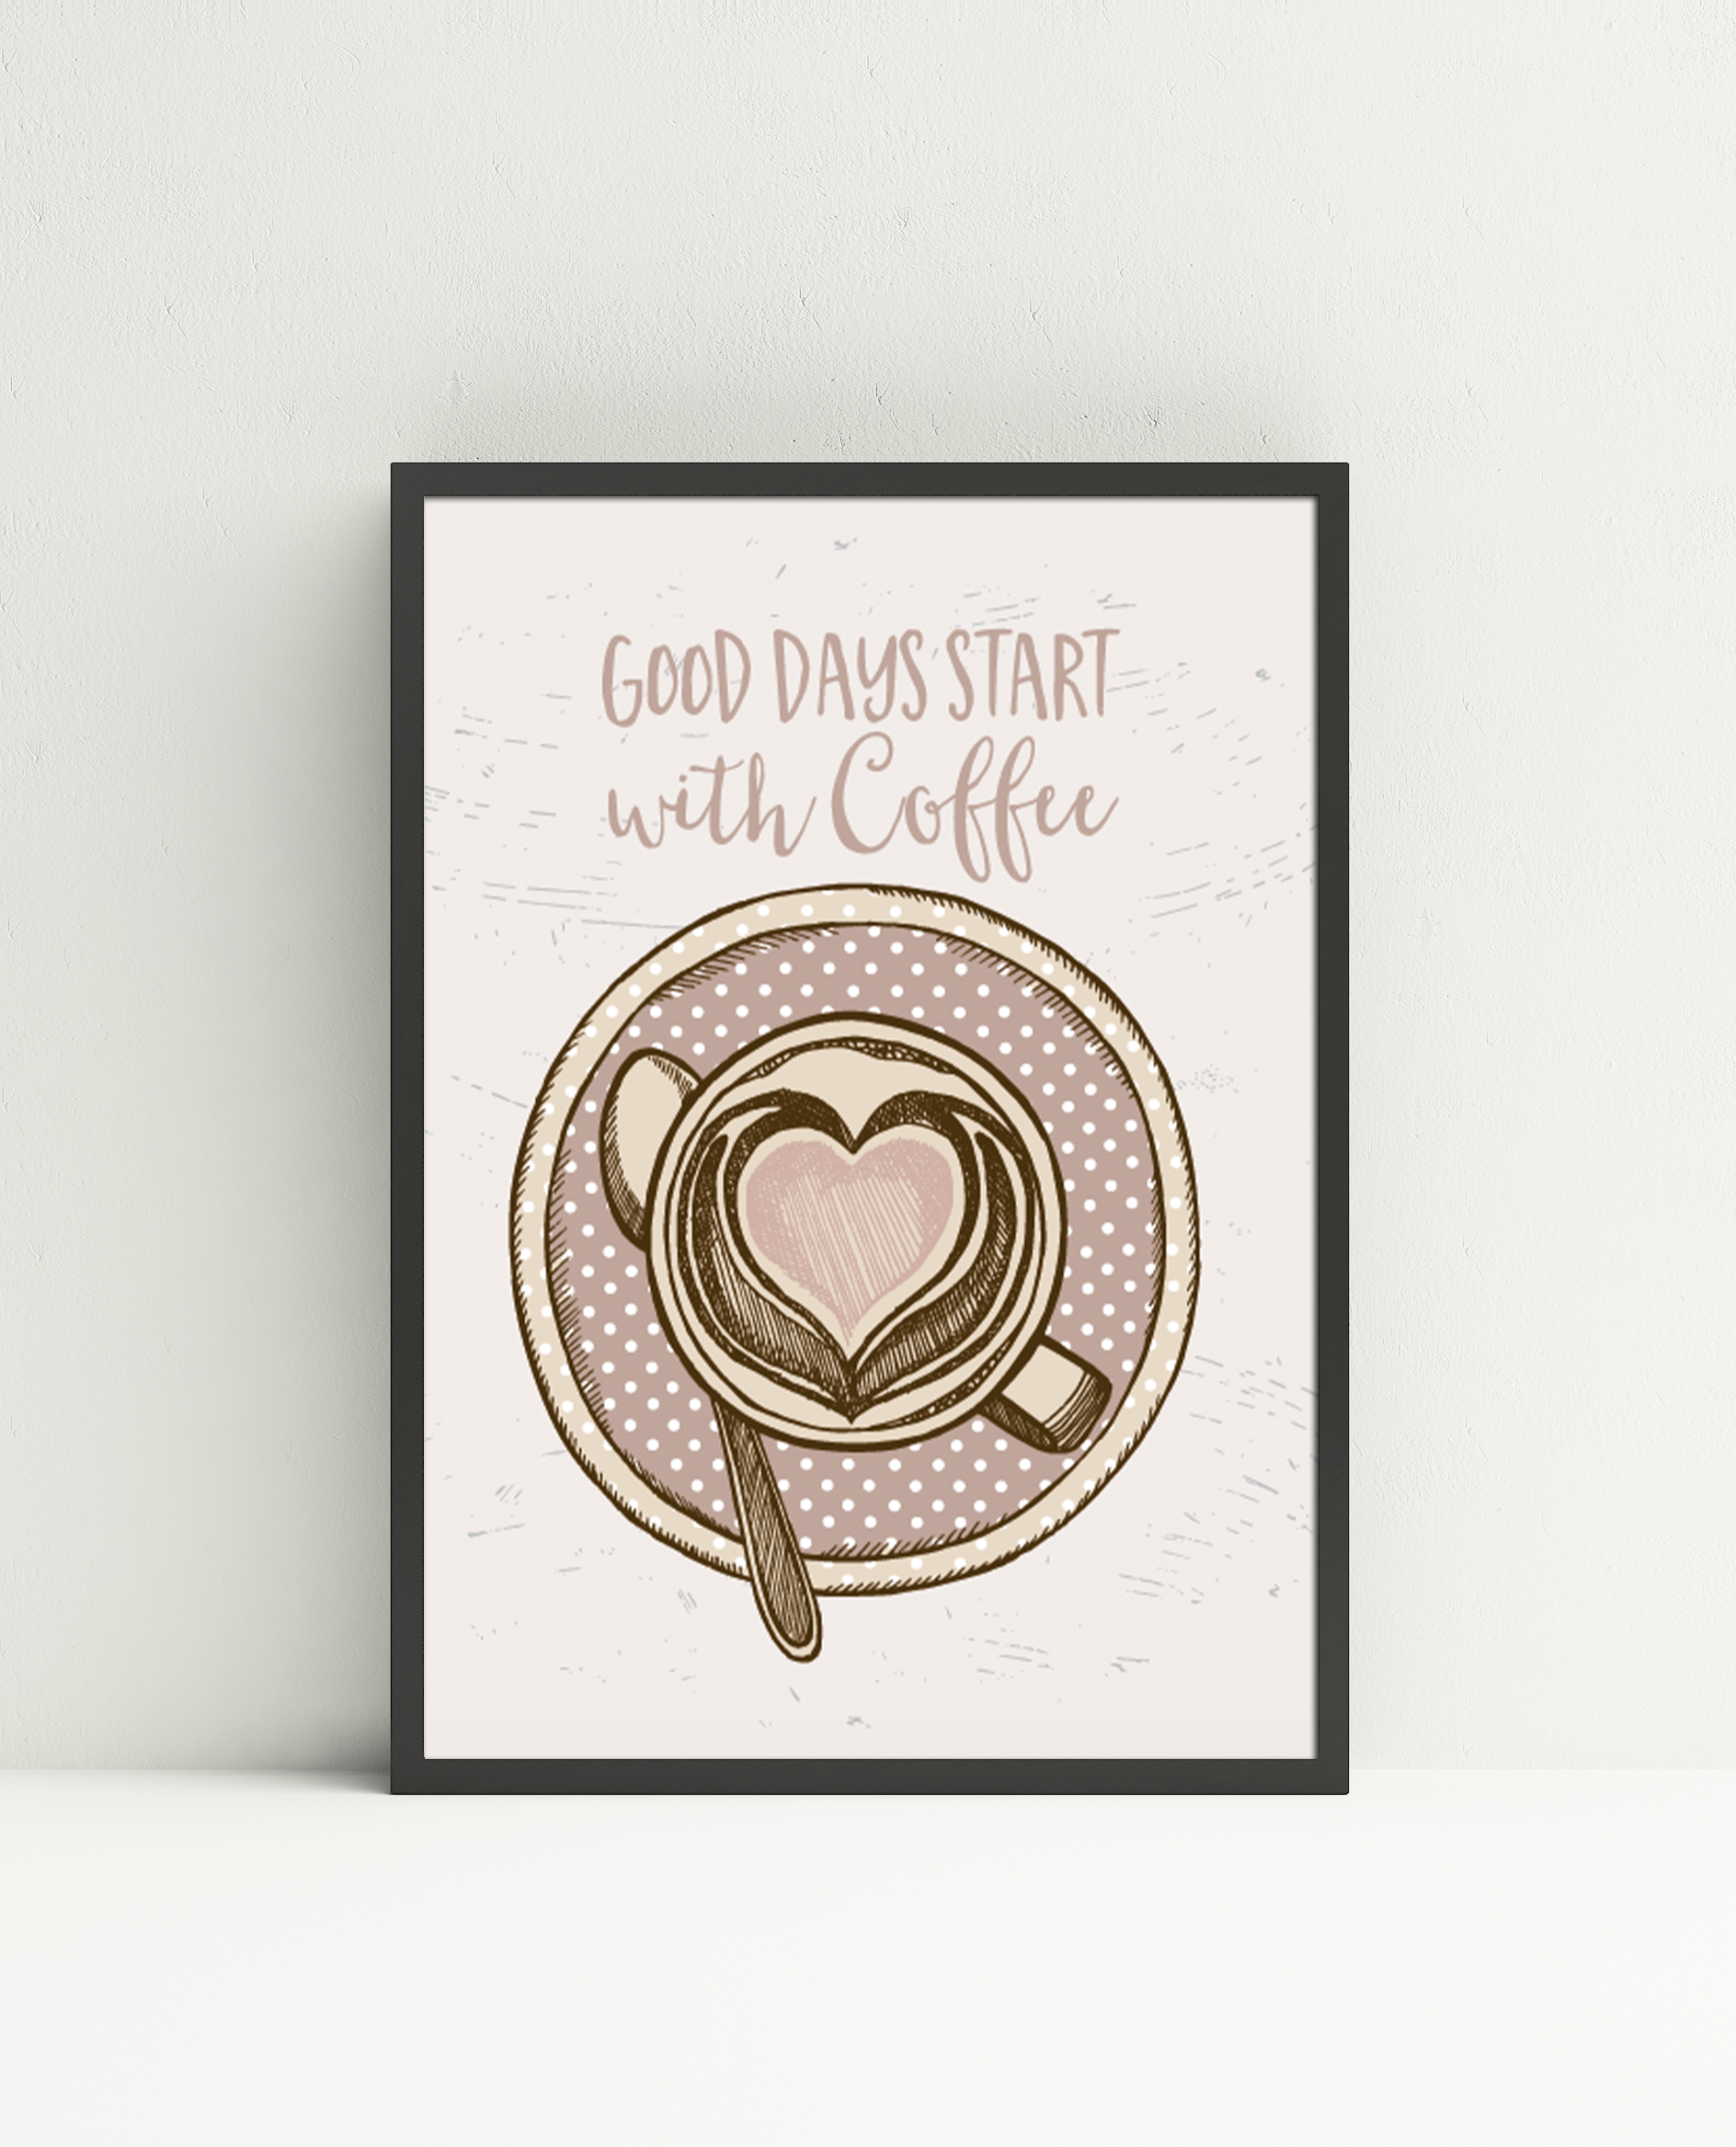 Good days starts with coffee (A5, A4,)